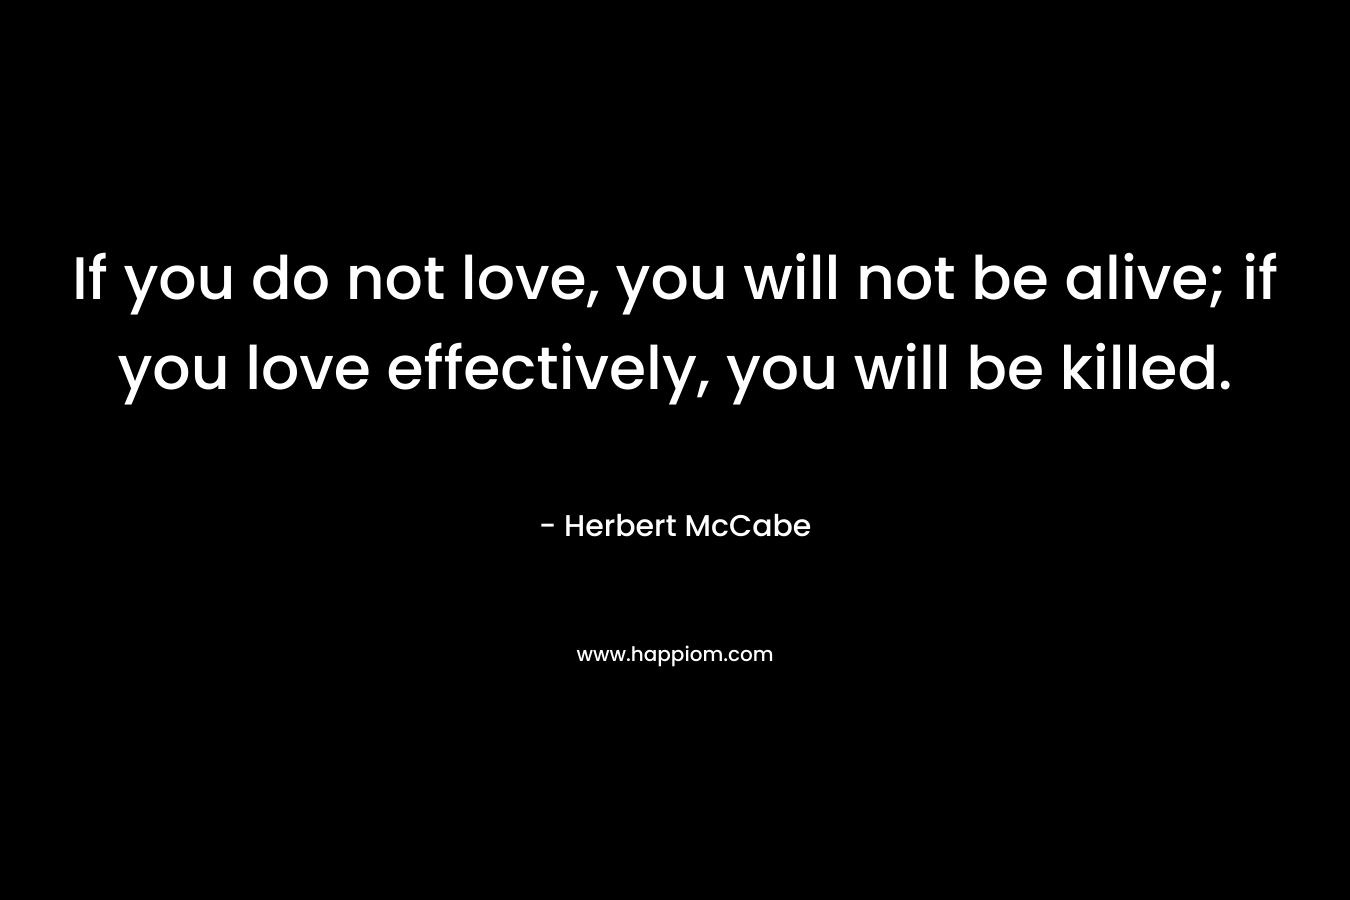 If you do not love, you will not be alive; if you love effectively, you will be killed.